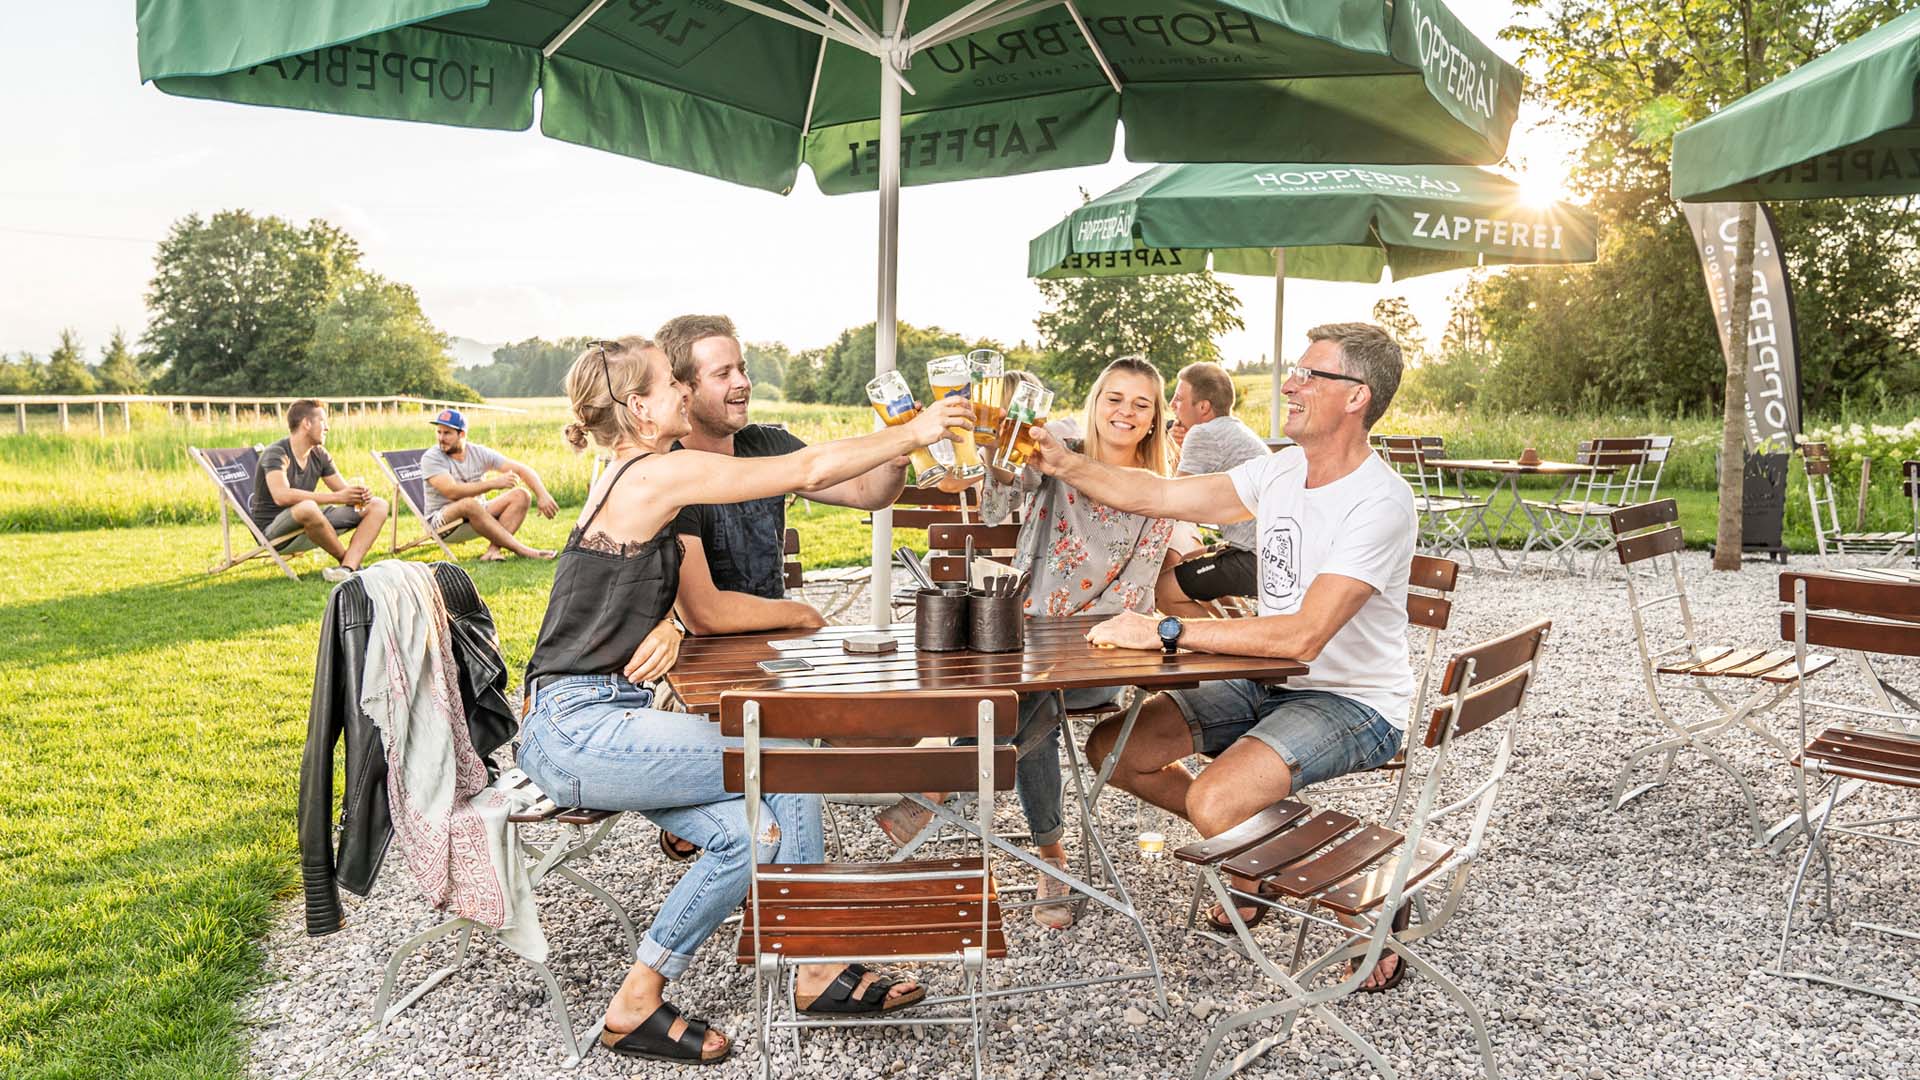 4 people are toasting with their beer on the beer garden furniture on the terrace of a pub.